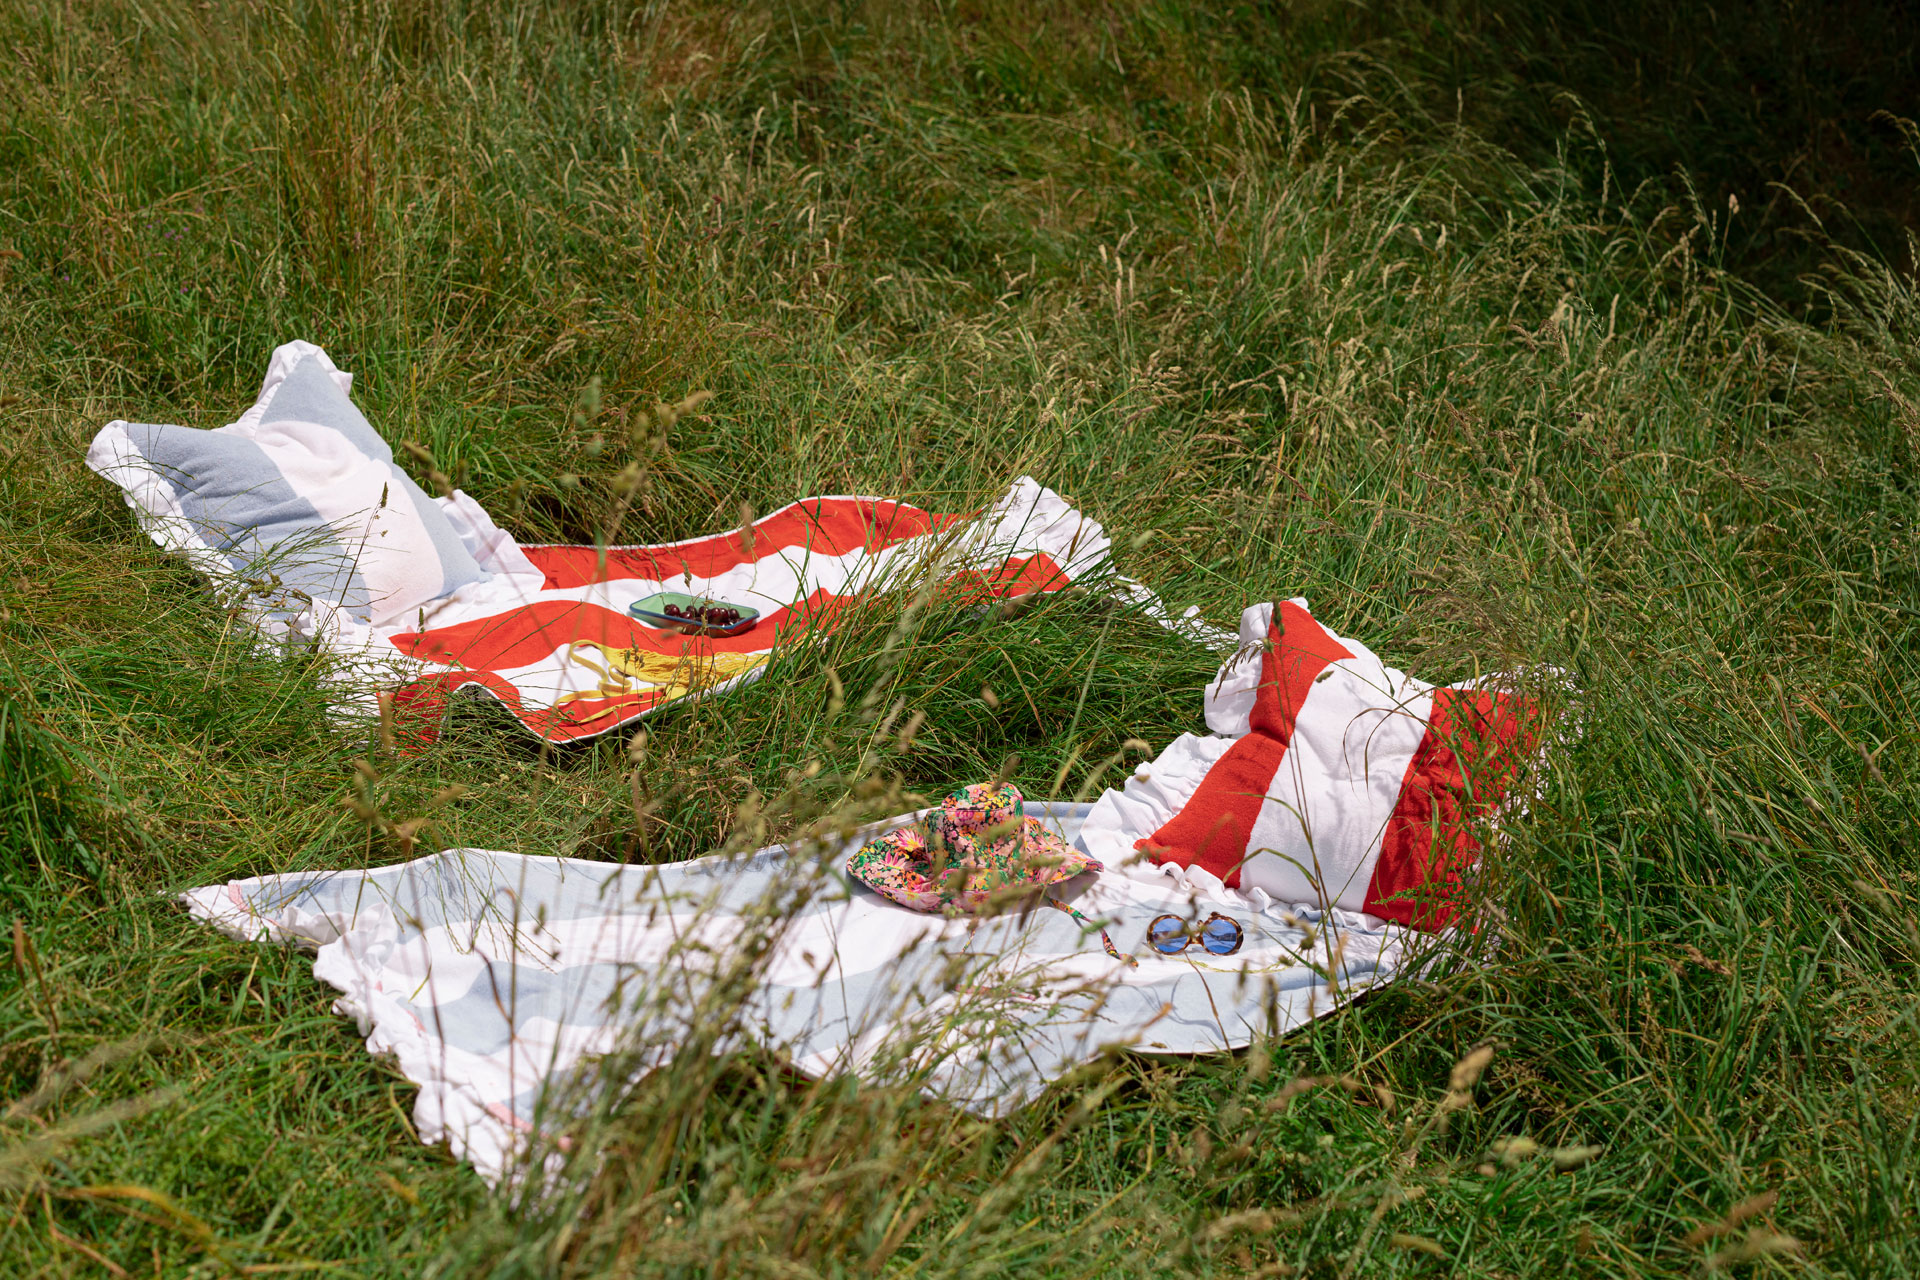 Cushions and fabric laid out on grass